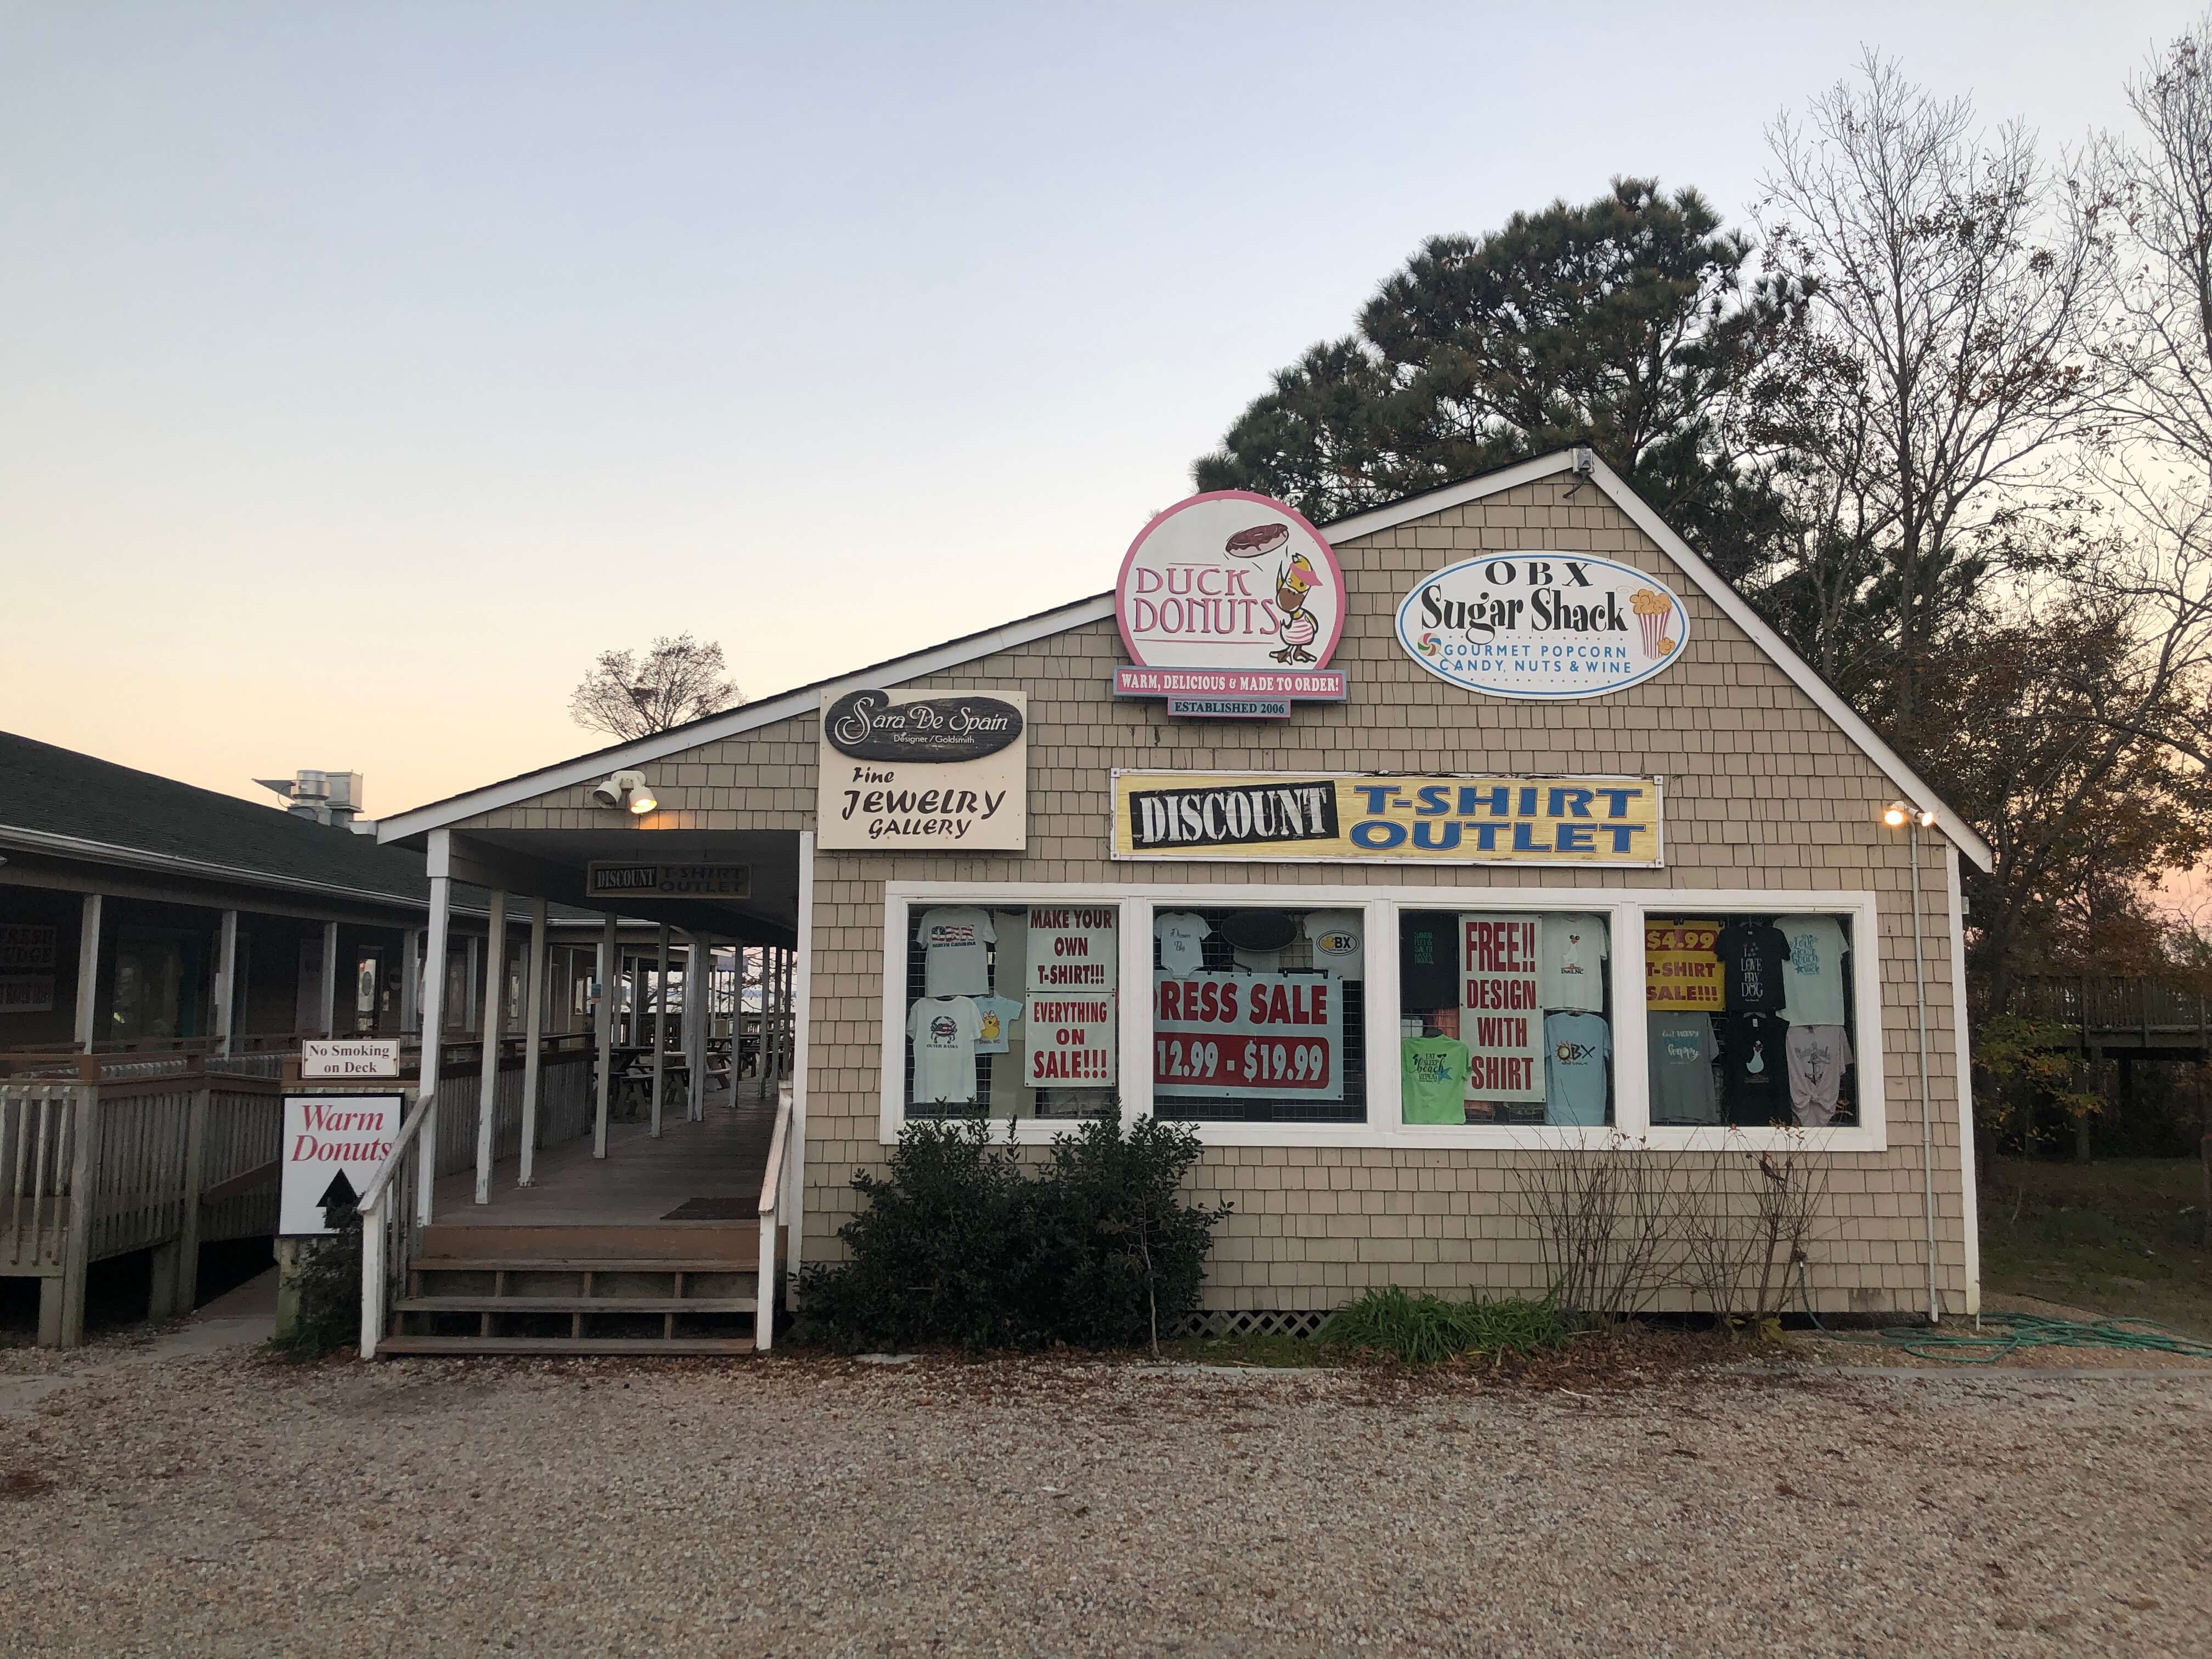 the exterior of a shingled shop building featuring signage for Duck Donuts and other OBX shops